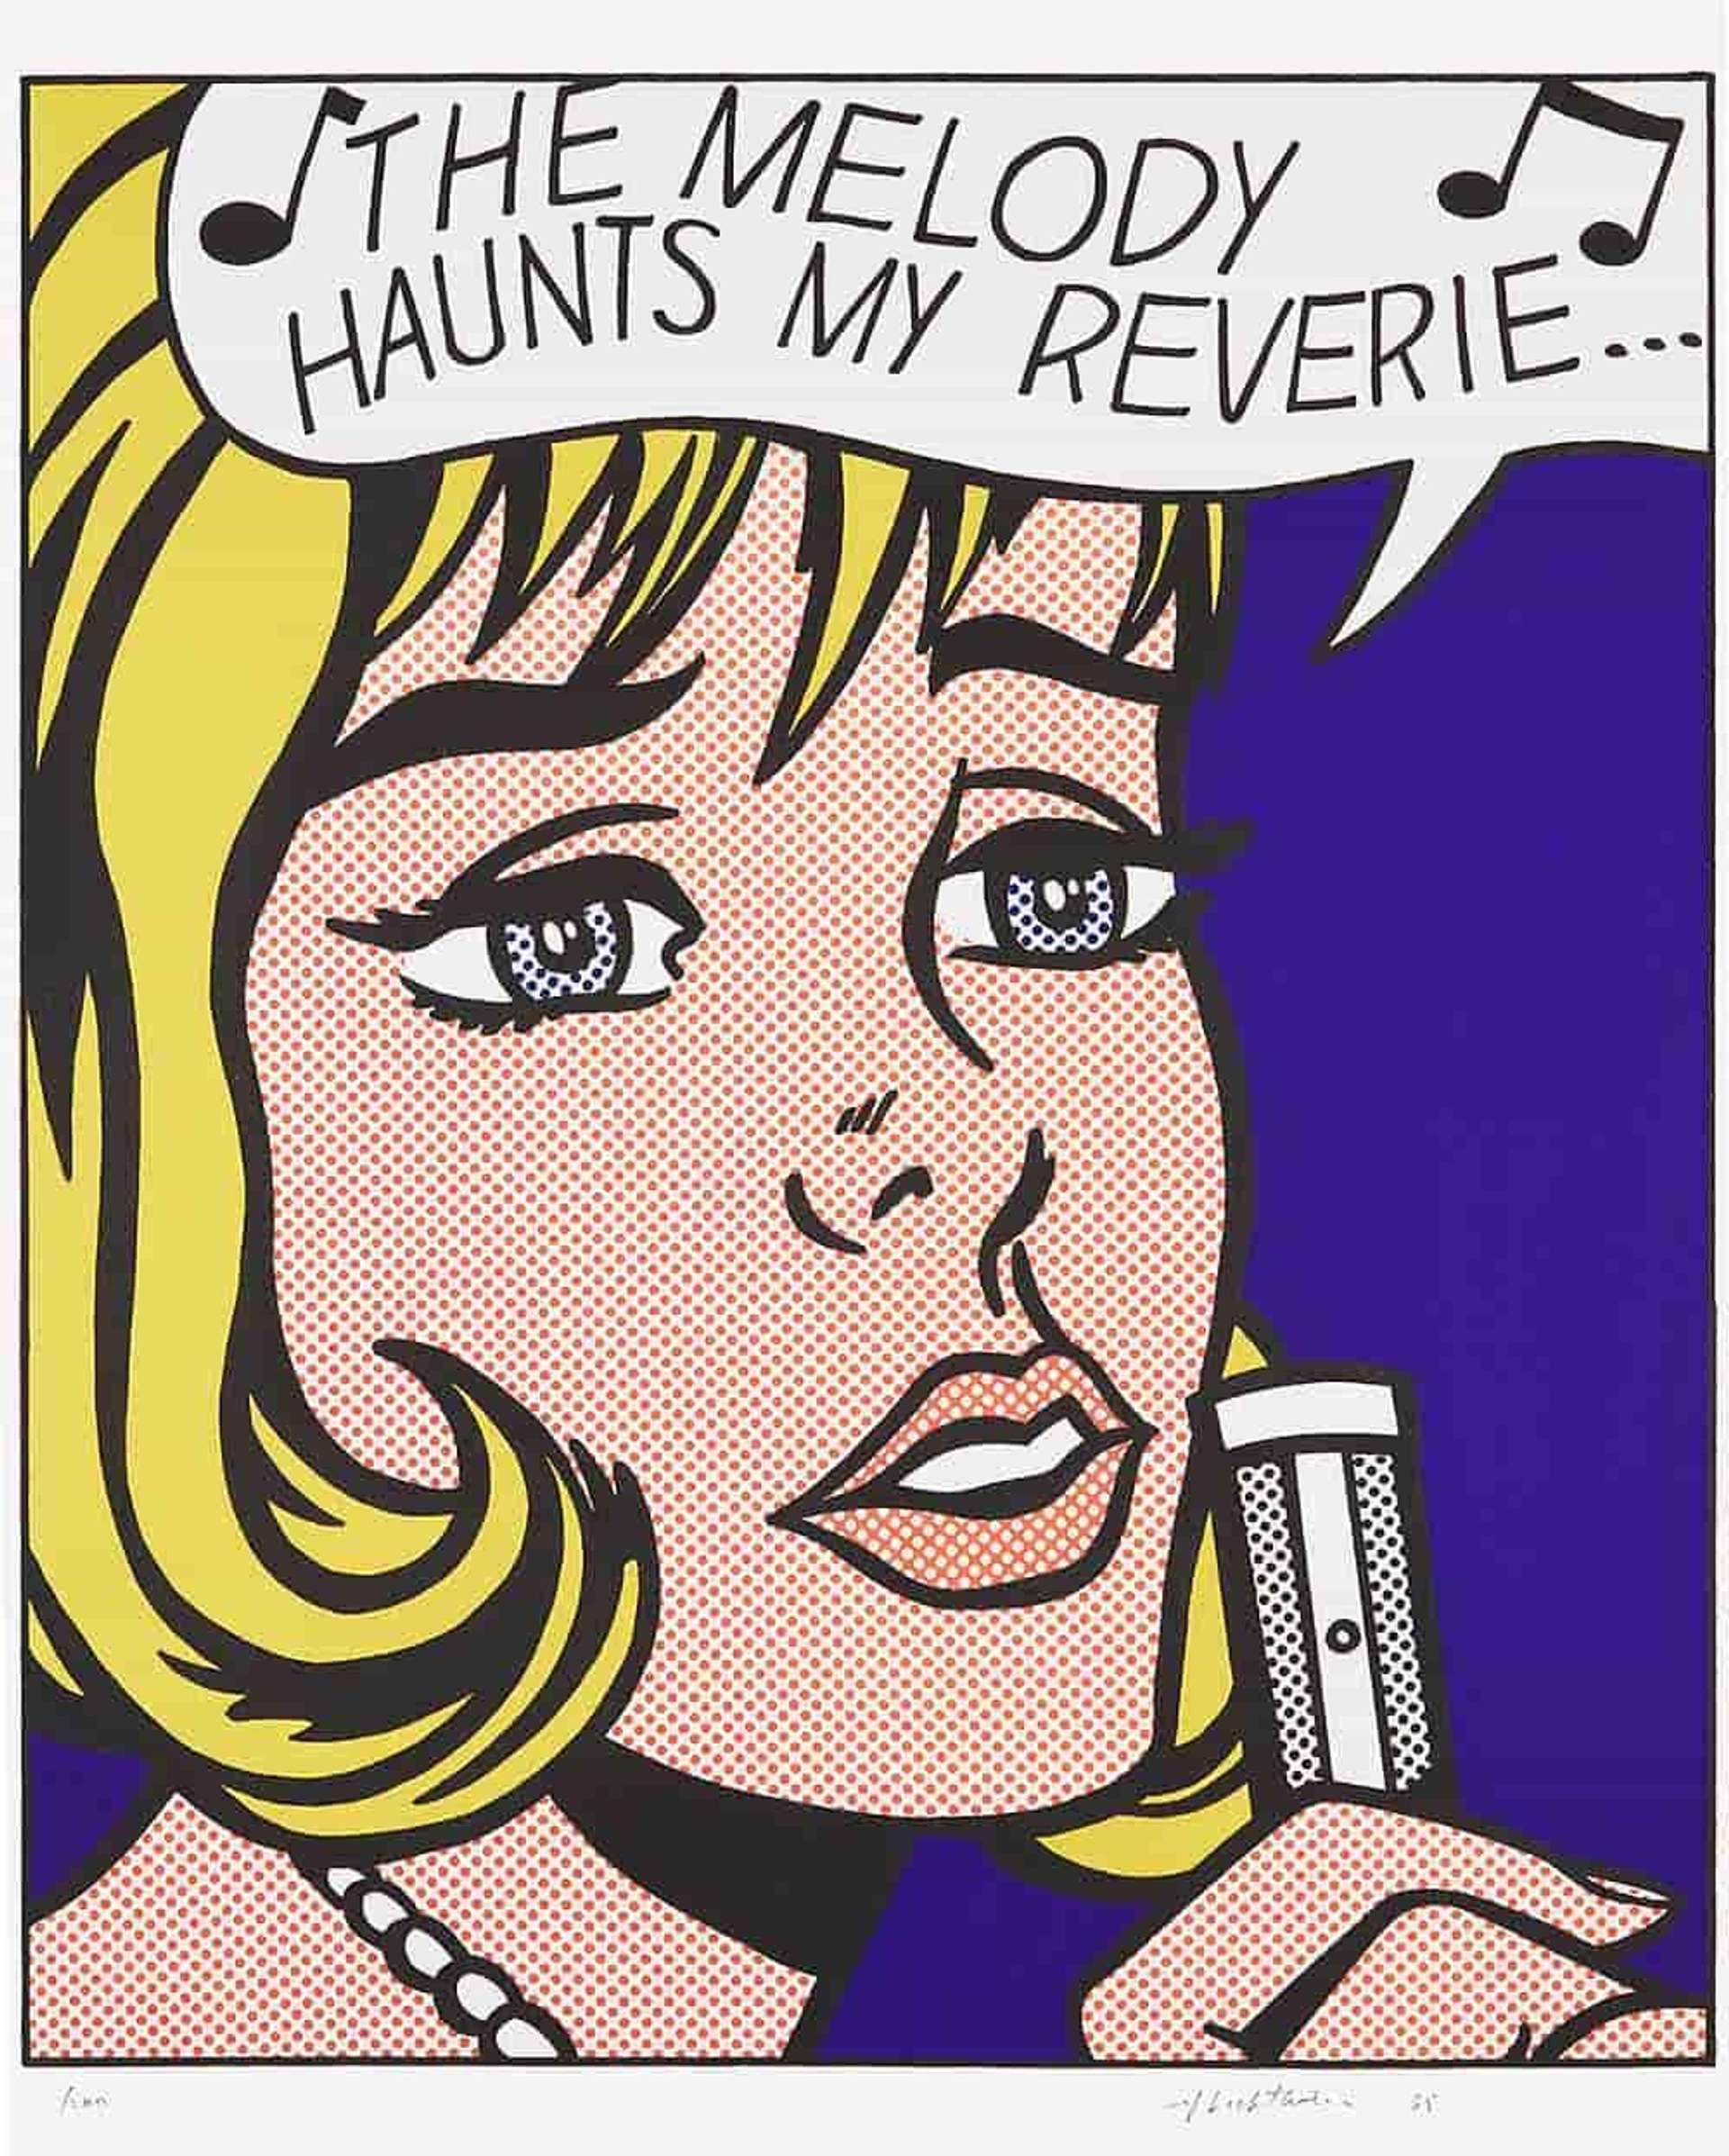 A screeprint by Roy Lichtenstein depicting a blonde woman in graphic style, with a speech bubble reading: “The melody haunts my reverie”.